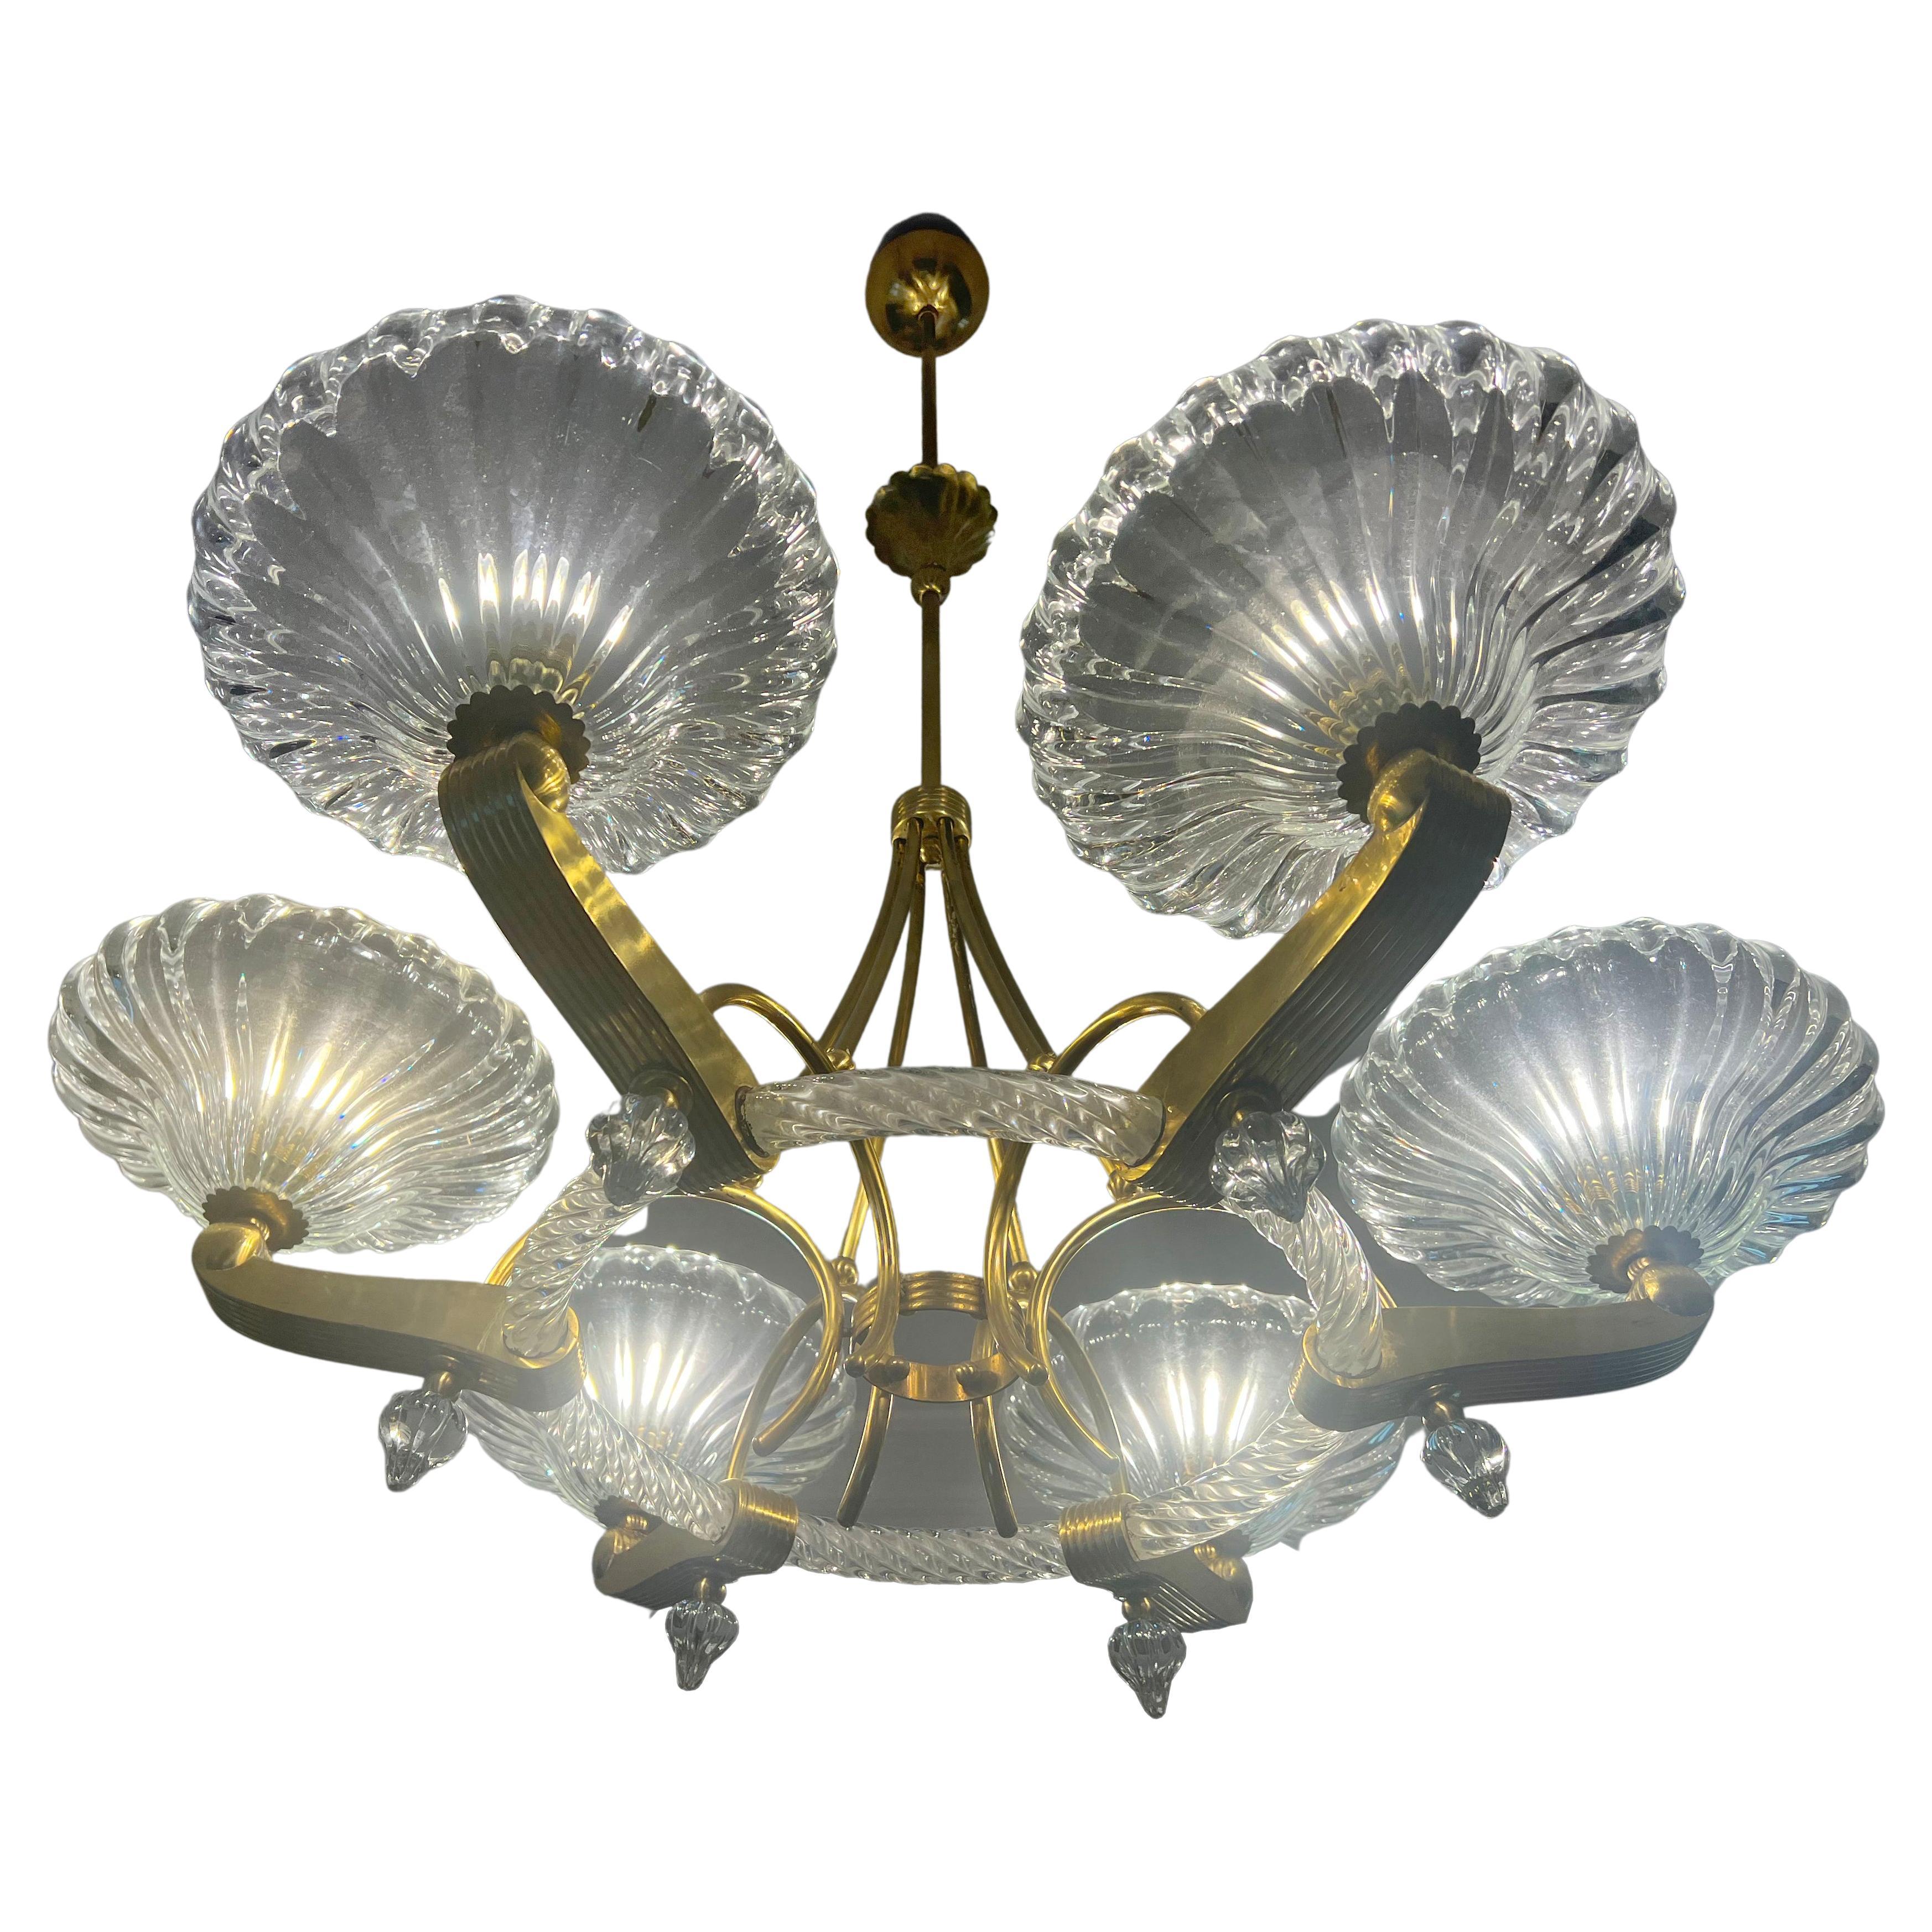 Chandelier by Barovier & Toso, Murano, 1940